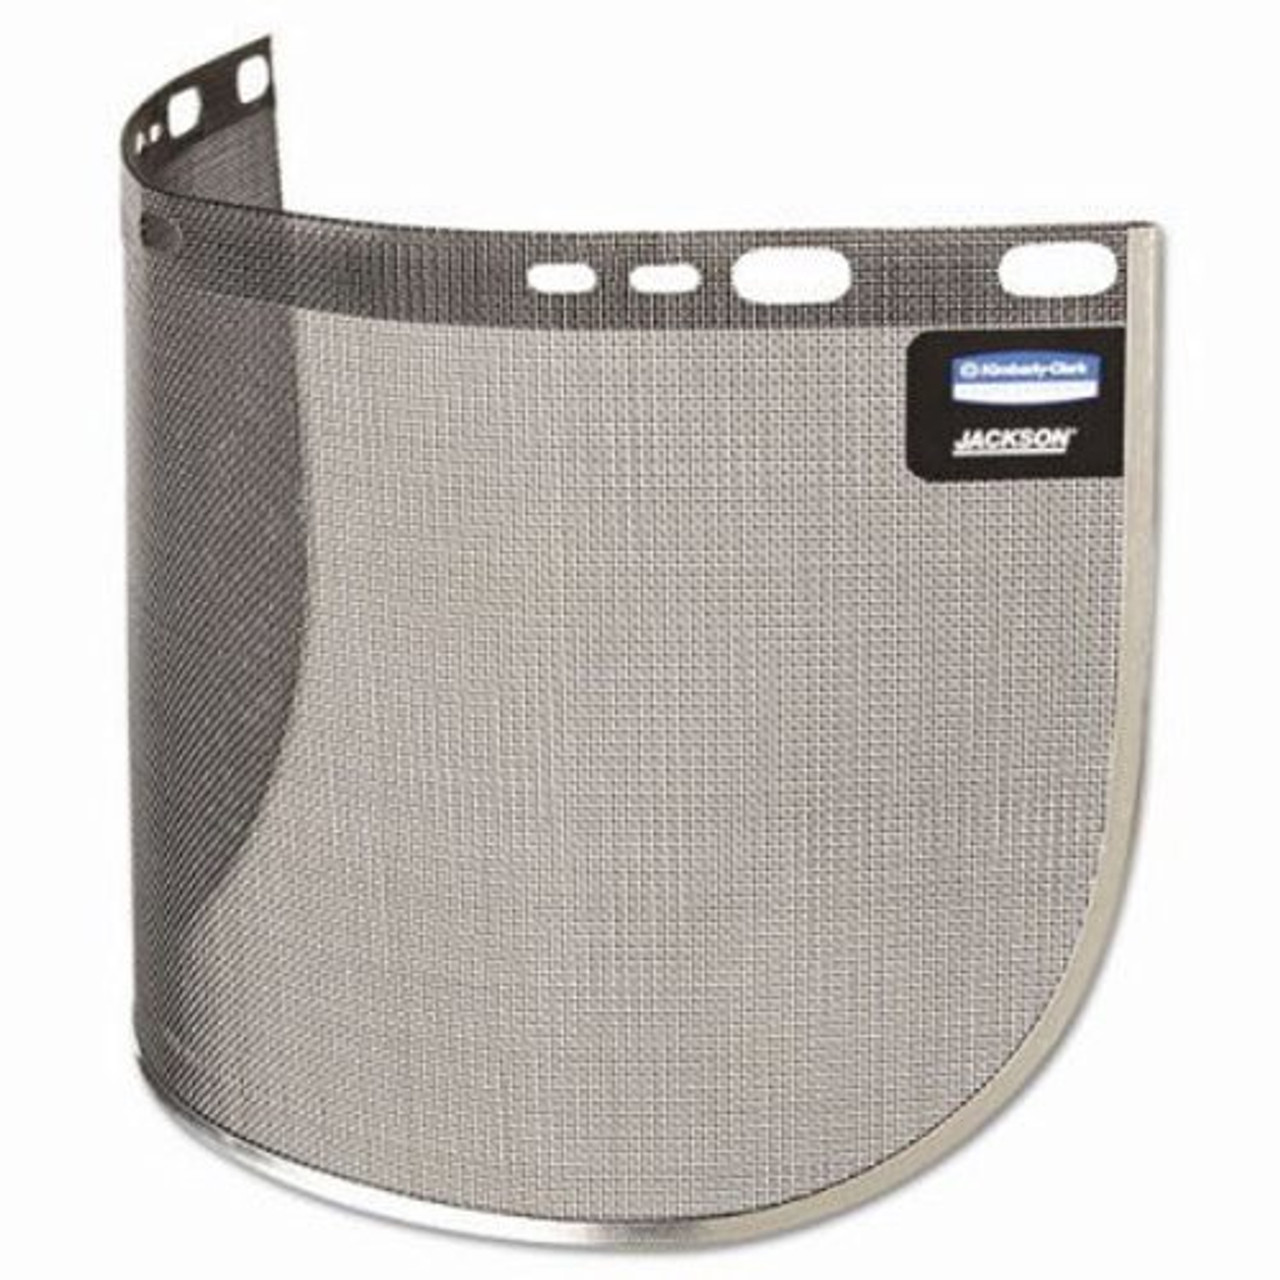 Jackson Safety®29081 Face Shields - Steel Mesh Protects against Flying Debris